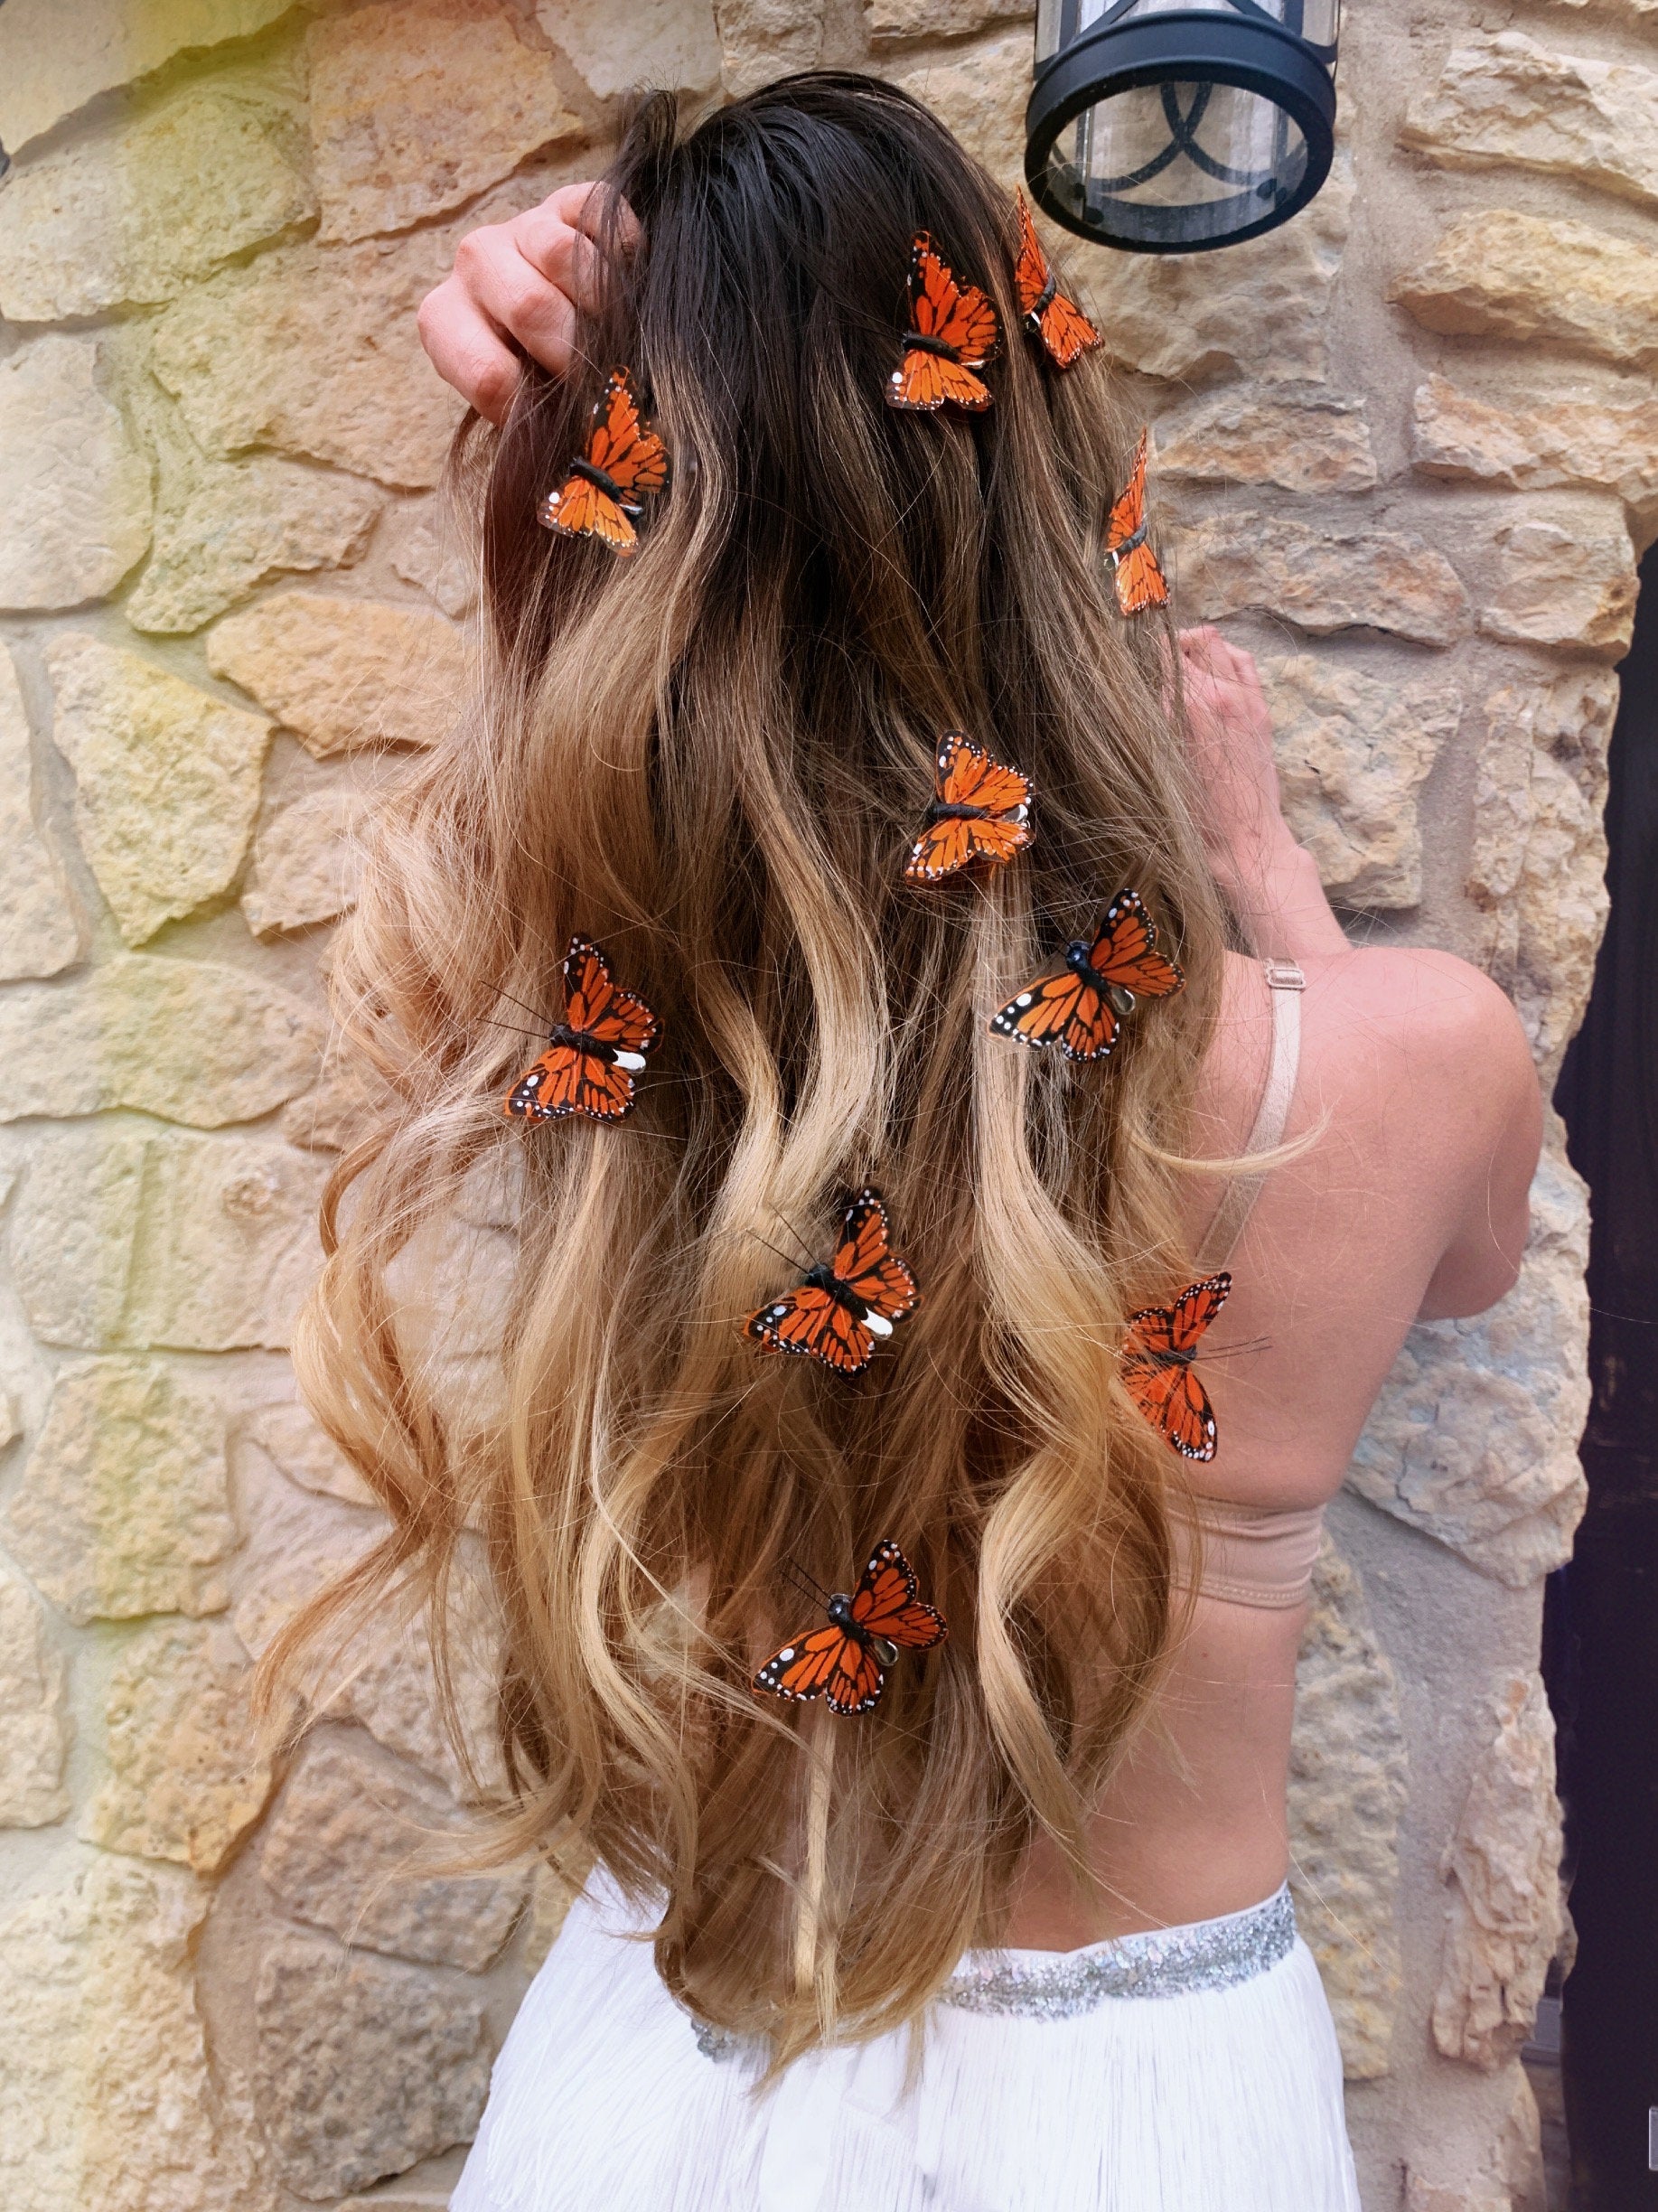 90s BABY! Butterfly clips are some of the CUTEST hair accessories. #ha... |  TikTok